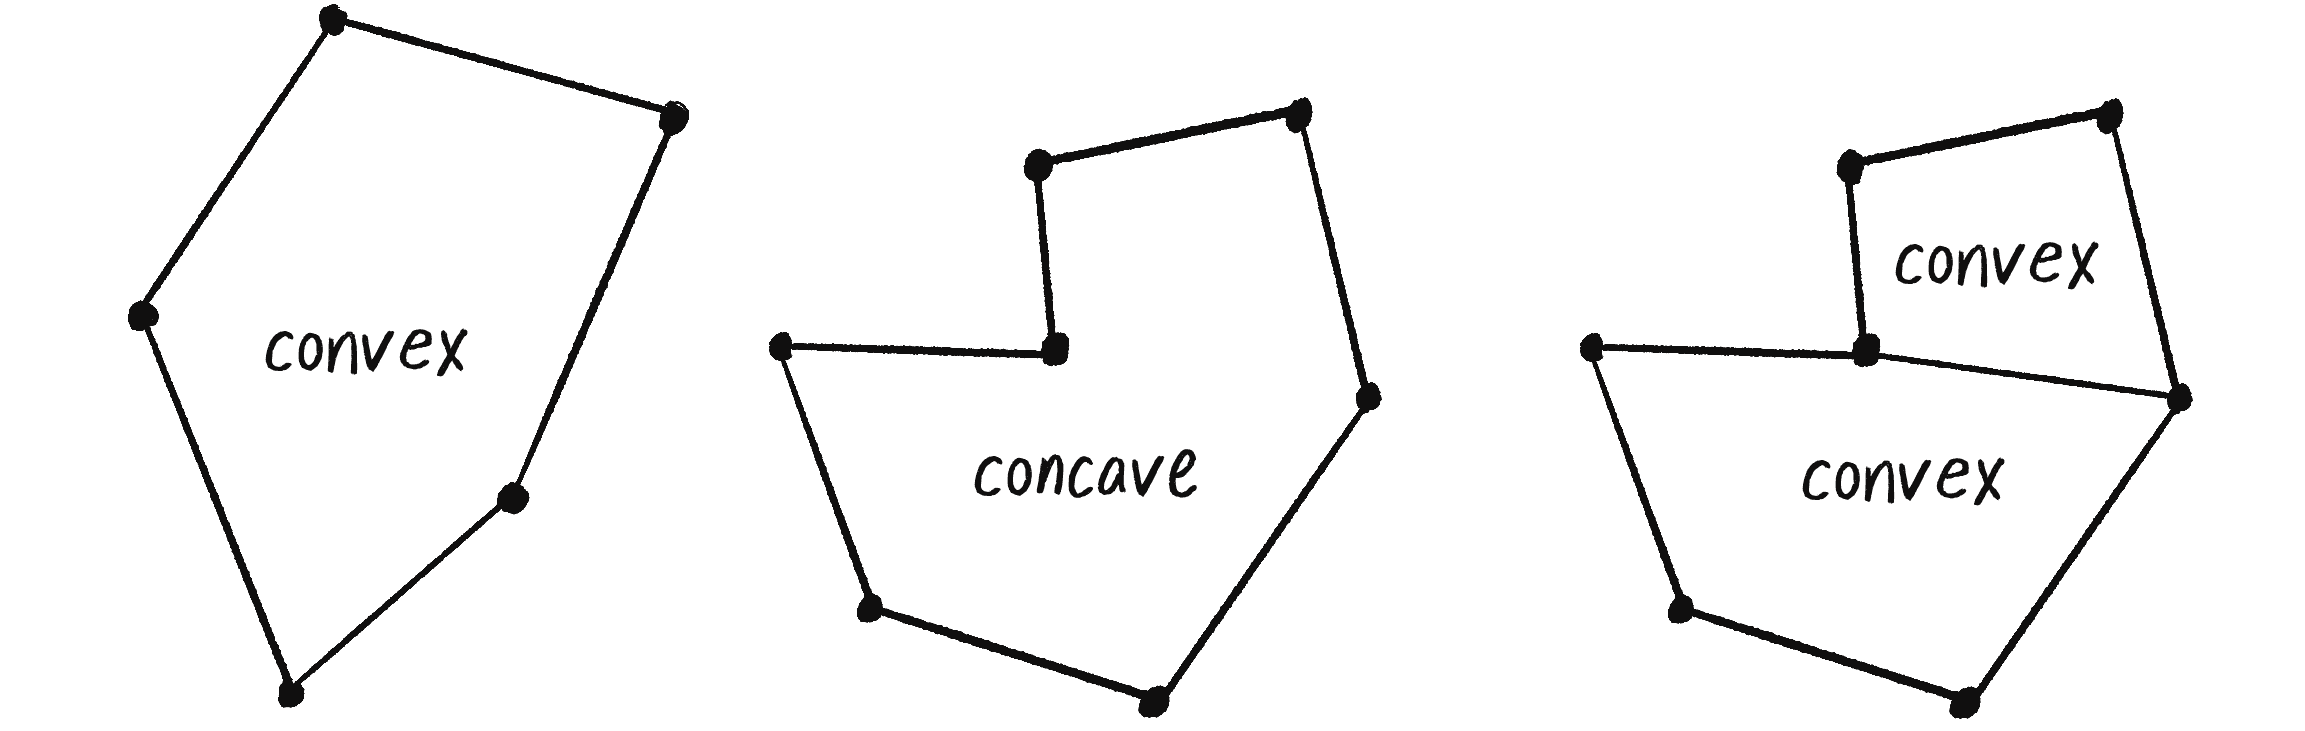 Figure 6.6: A concave shape can be drawn with multiple convex shapes. 